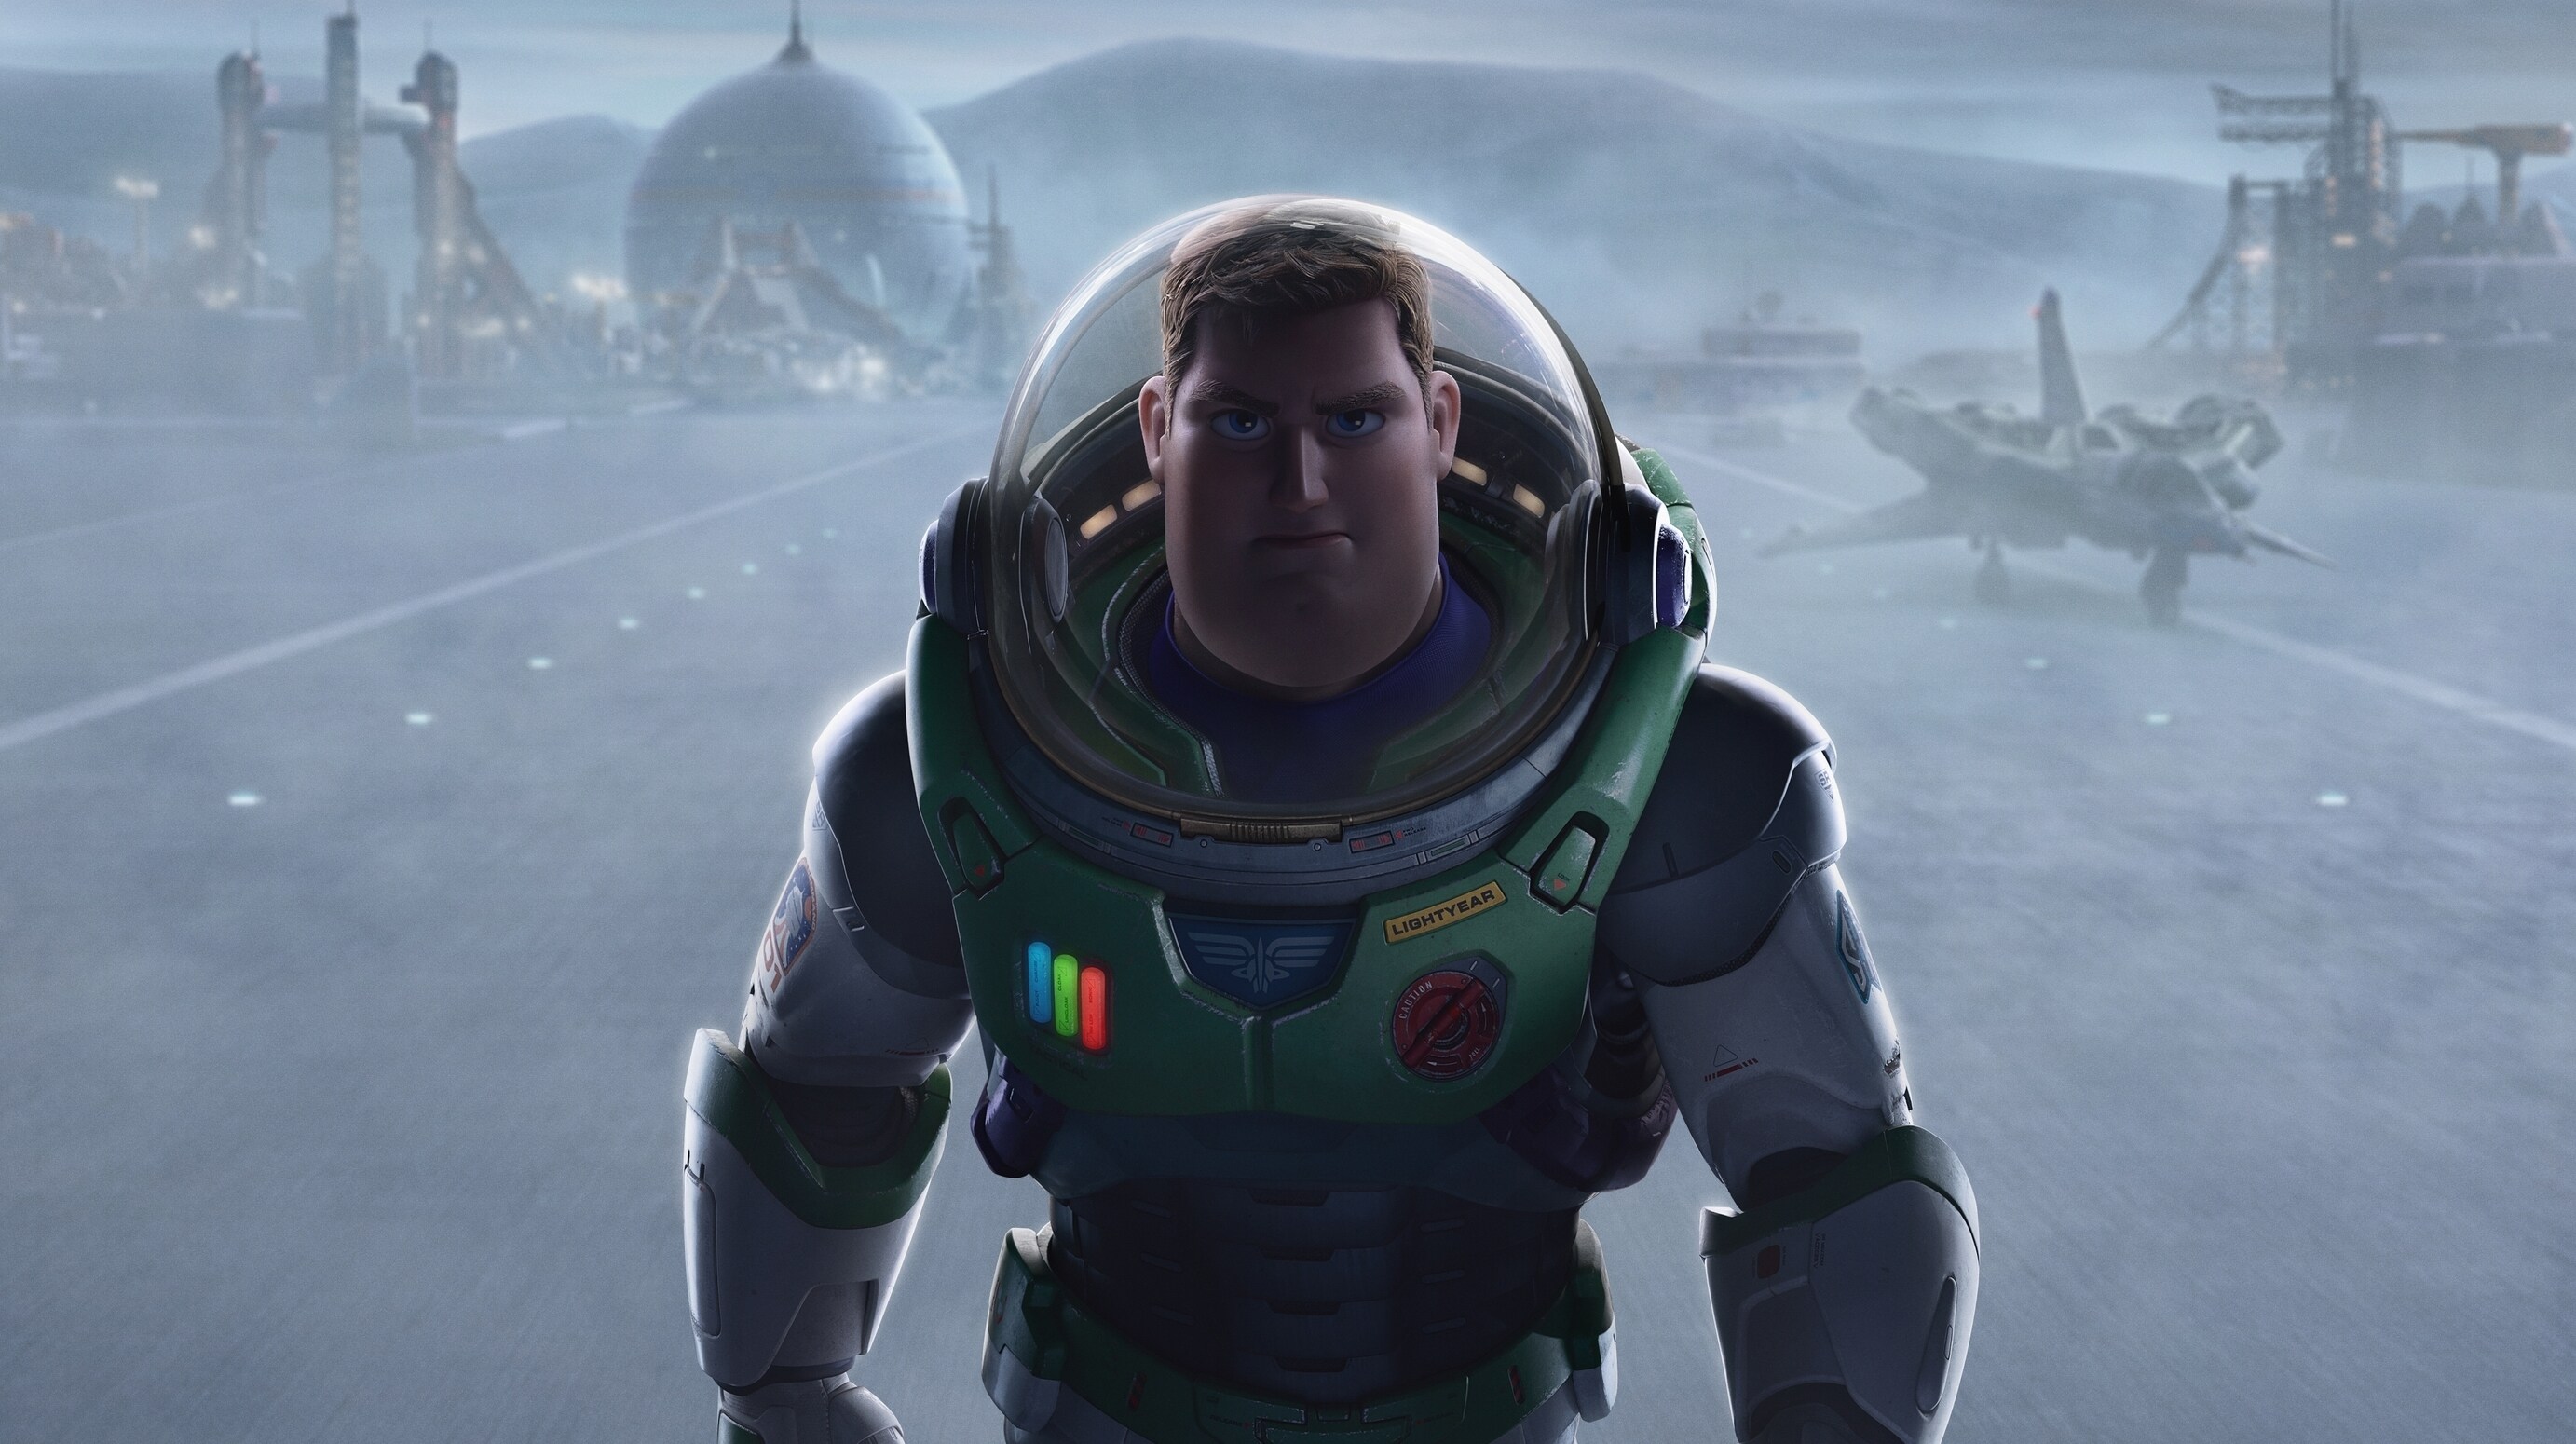 Brand new action-packed trailer for Disney and Pixar's "Lightyear" just launched